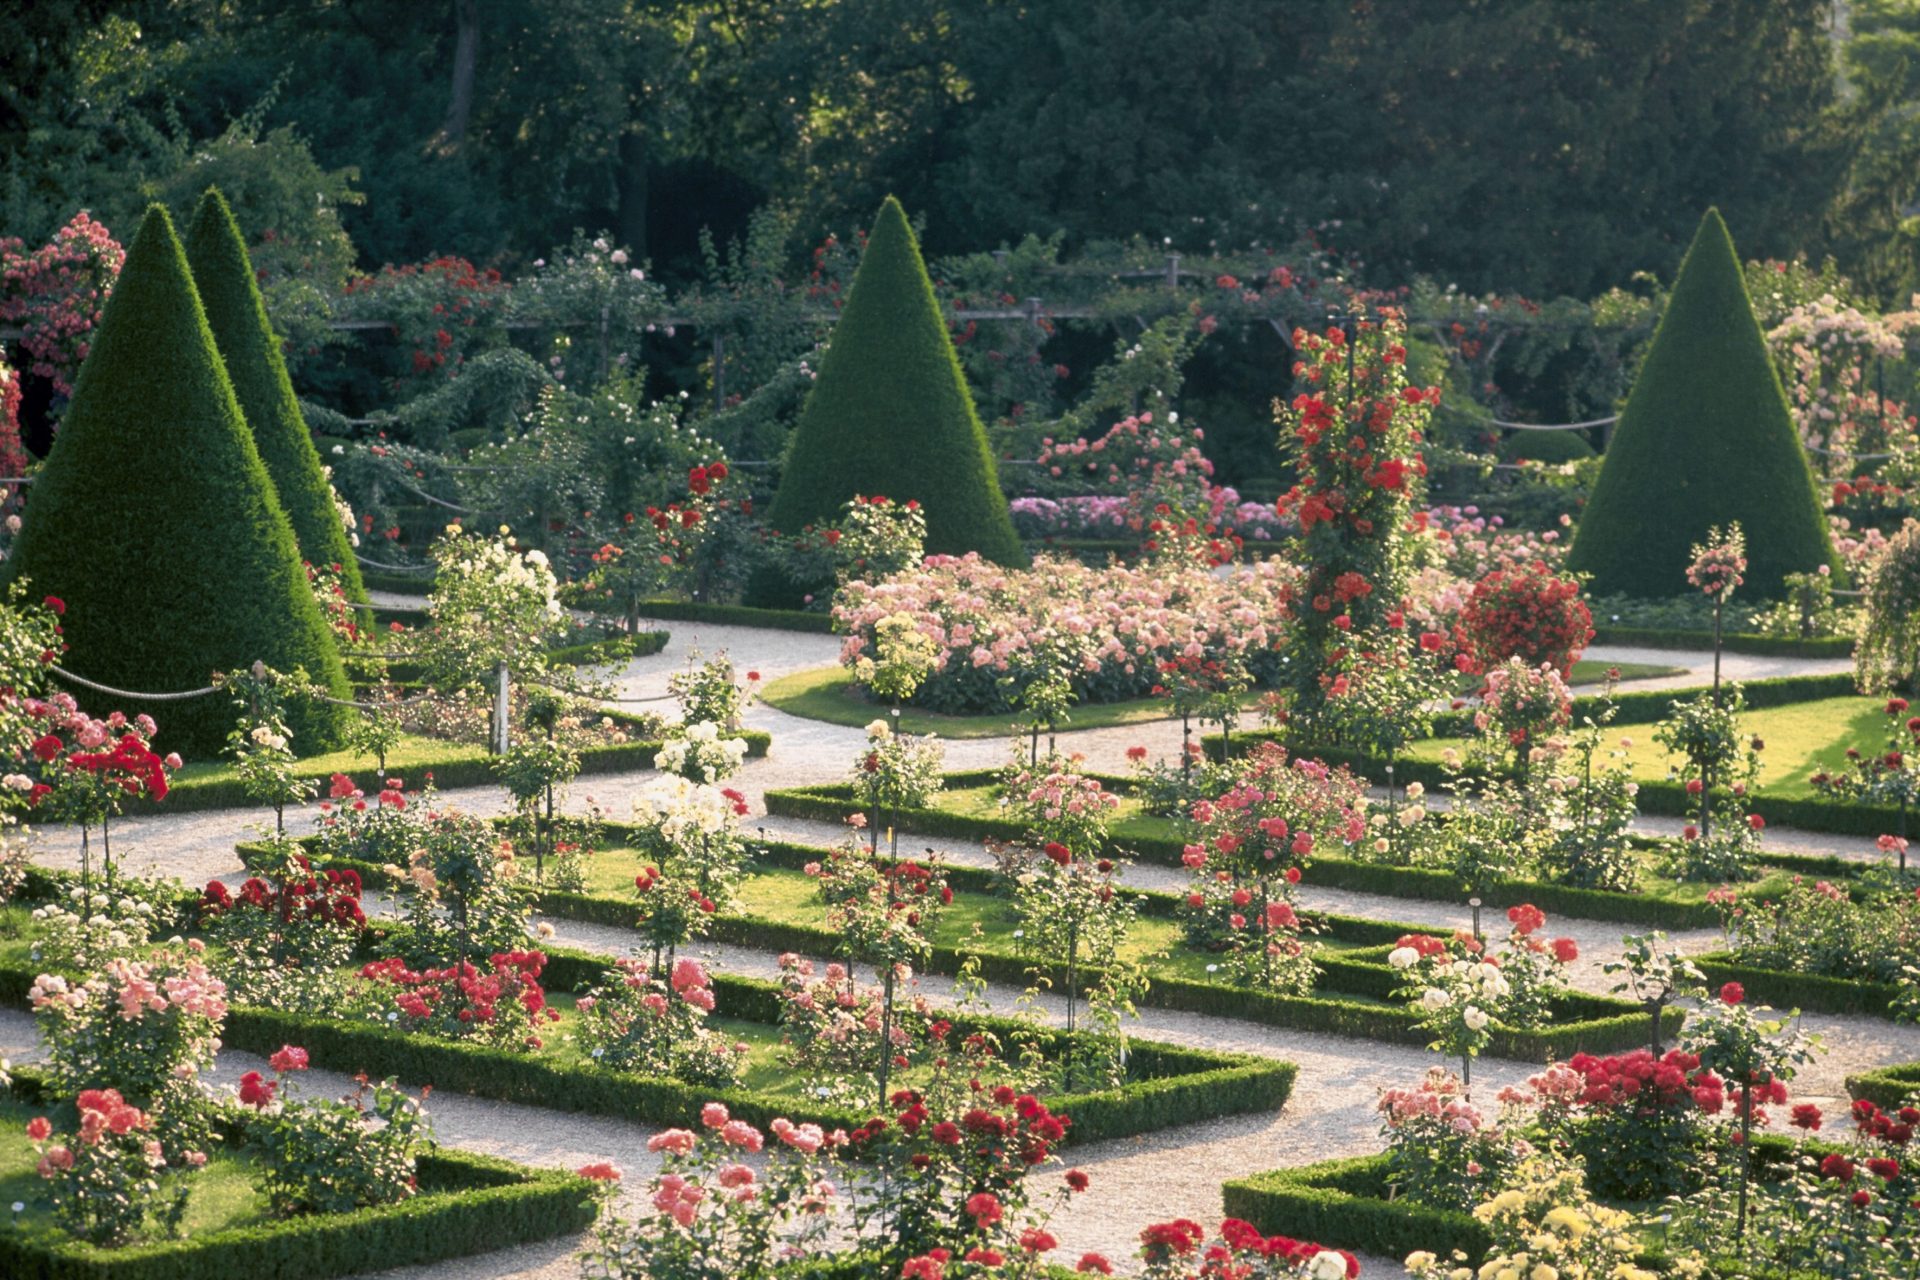 <p>Nestled in the Bois de Boulogne, this magnificent garden is famous for its rose collection, boasting about 1,100 varieties that offer a burst of color and fragrance in spring and summer.</p>